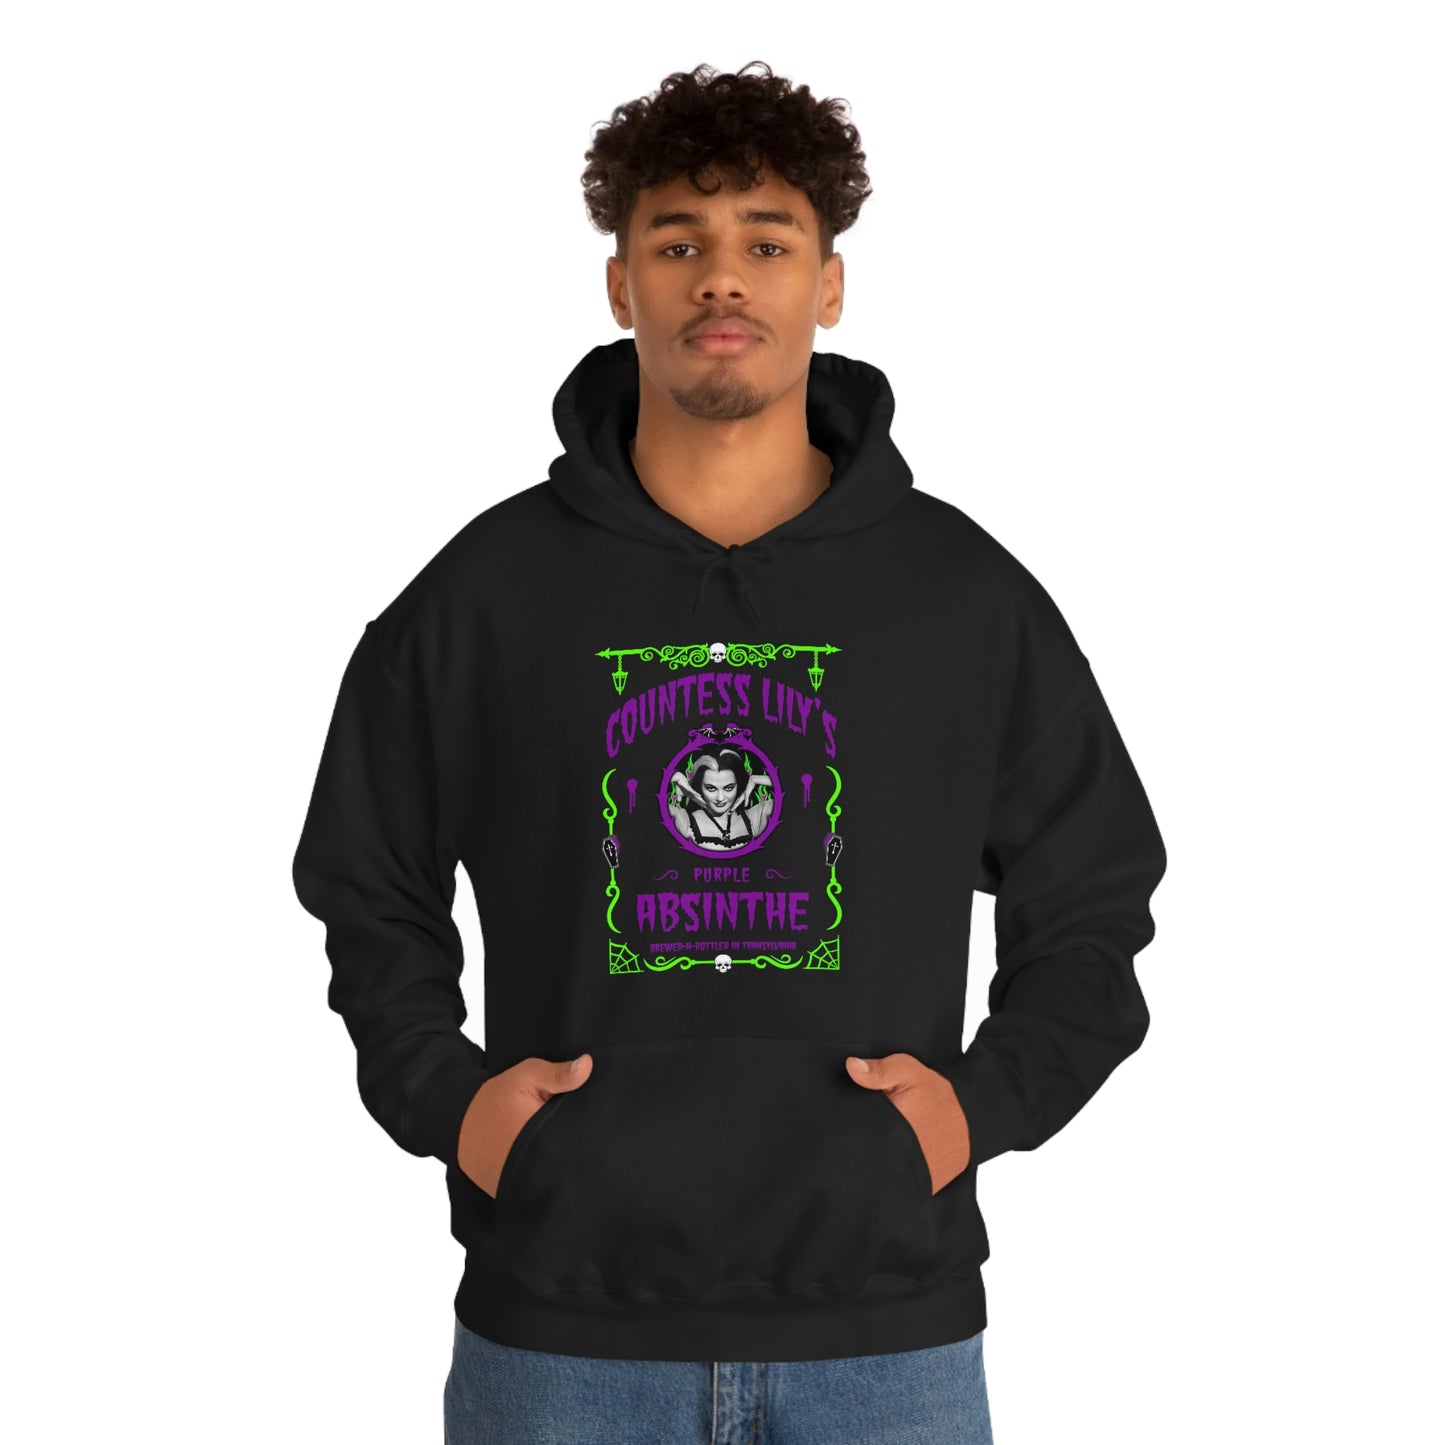 ABSINTHE MONSTERS 3 (COUNTESS LILY) Unisex Heavy Blend™ Hooded Sweatshirt